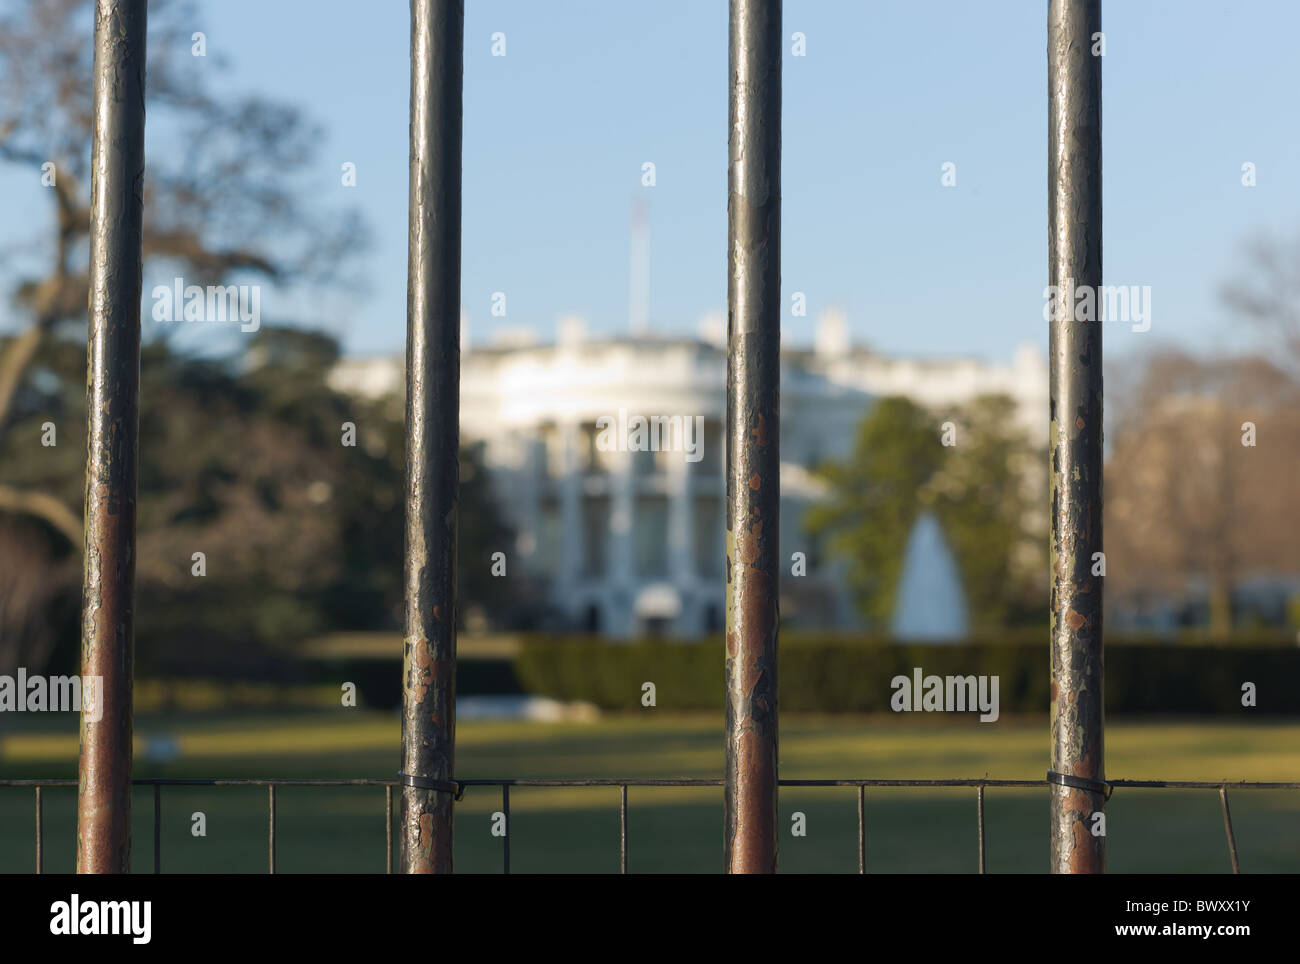 The White House, viewed through security bars, in Washington, DC. Stock Photo